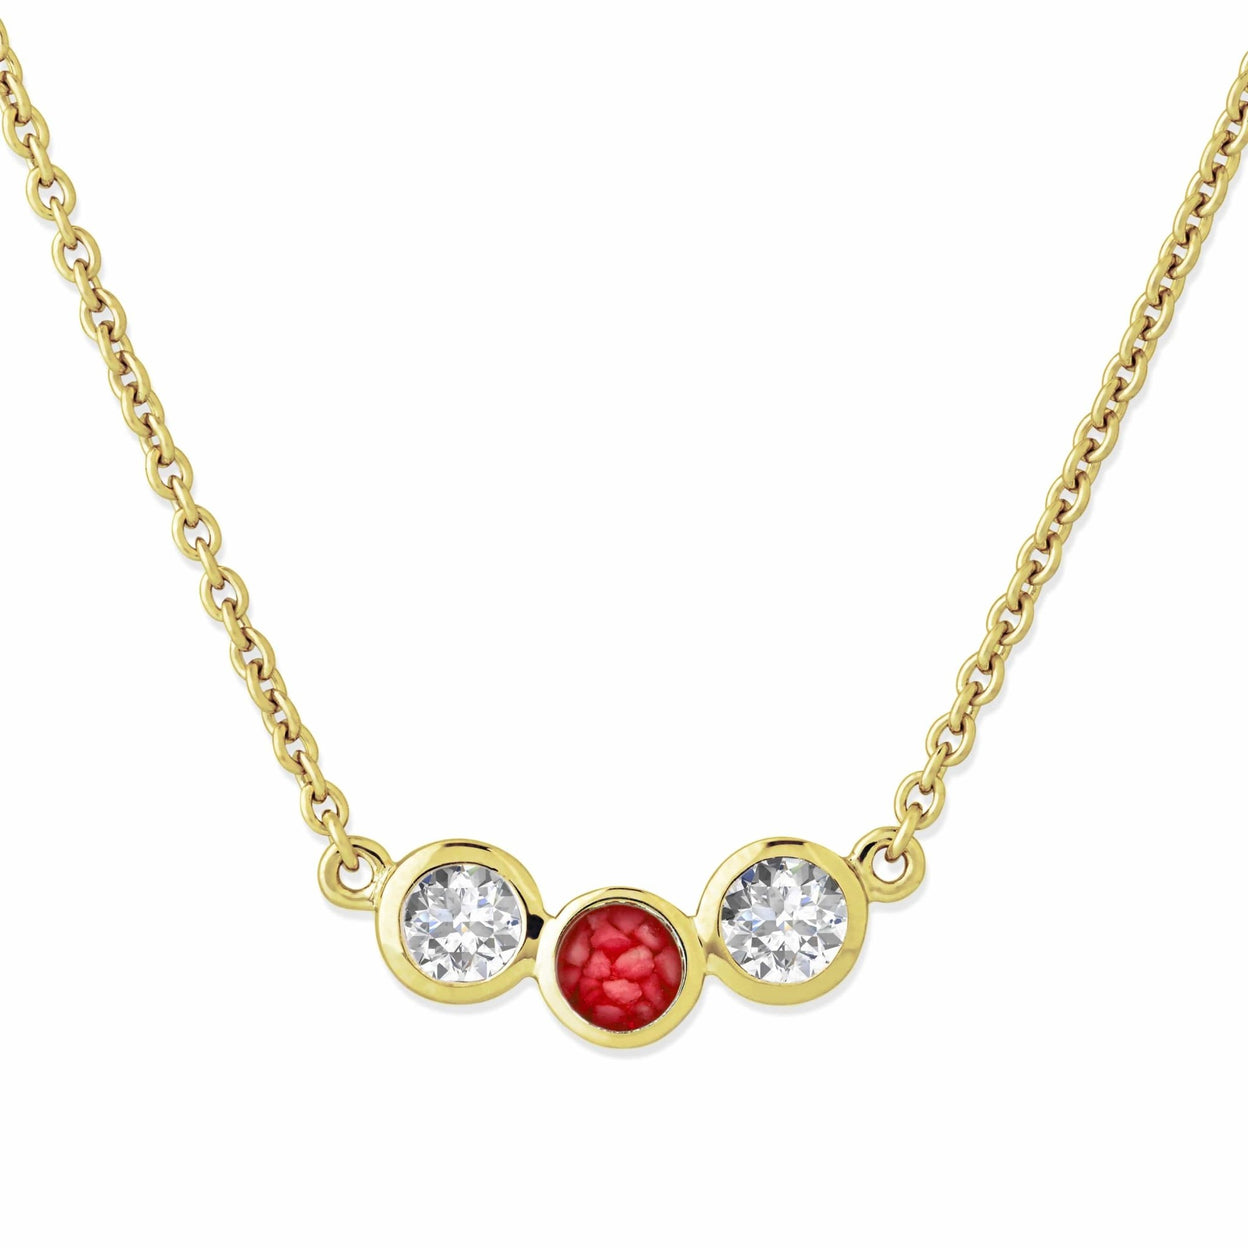 Load image into Gallery viewer, EverWith Ladies Three Of Us Memorial Ashes Necklace - EverWith Memorial Jewellery - Trade